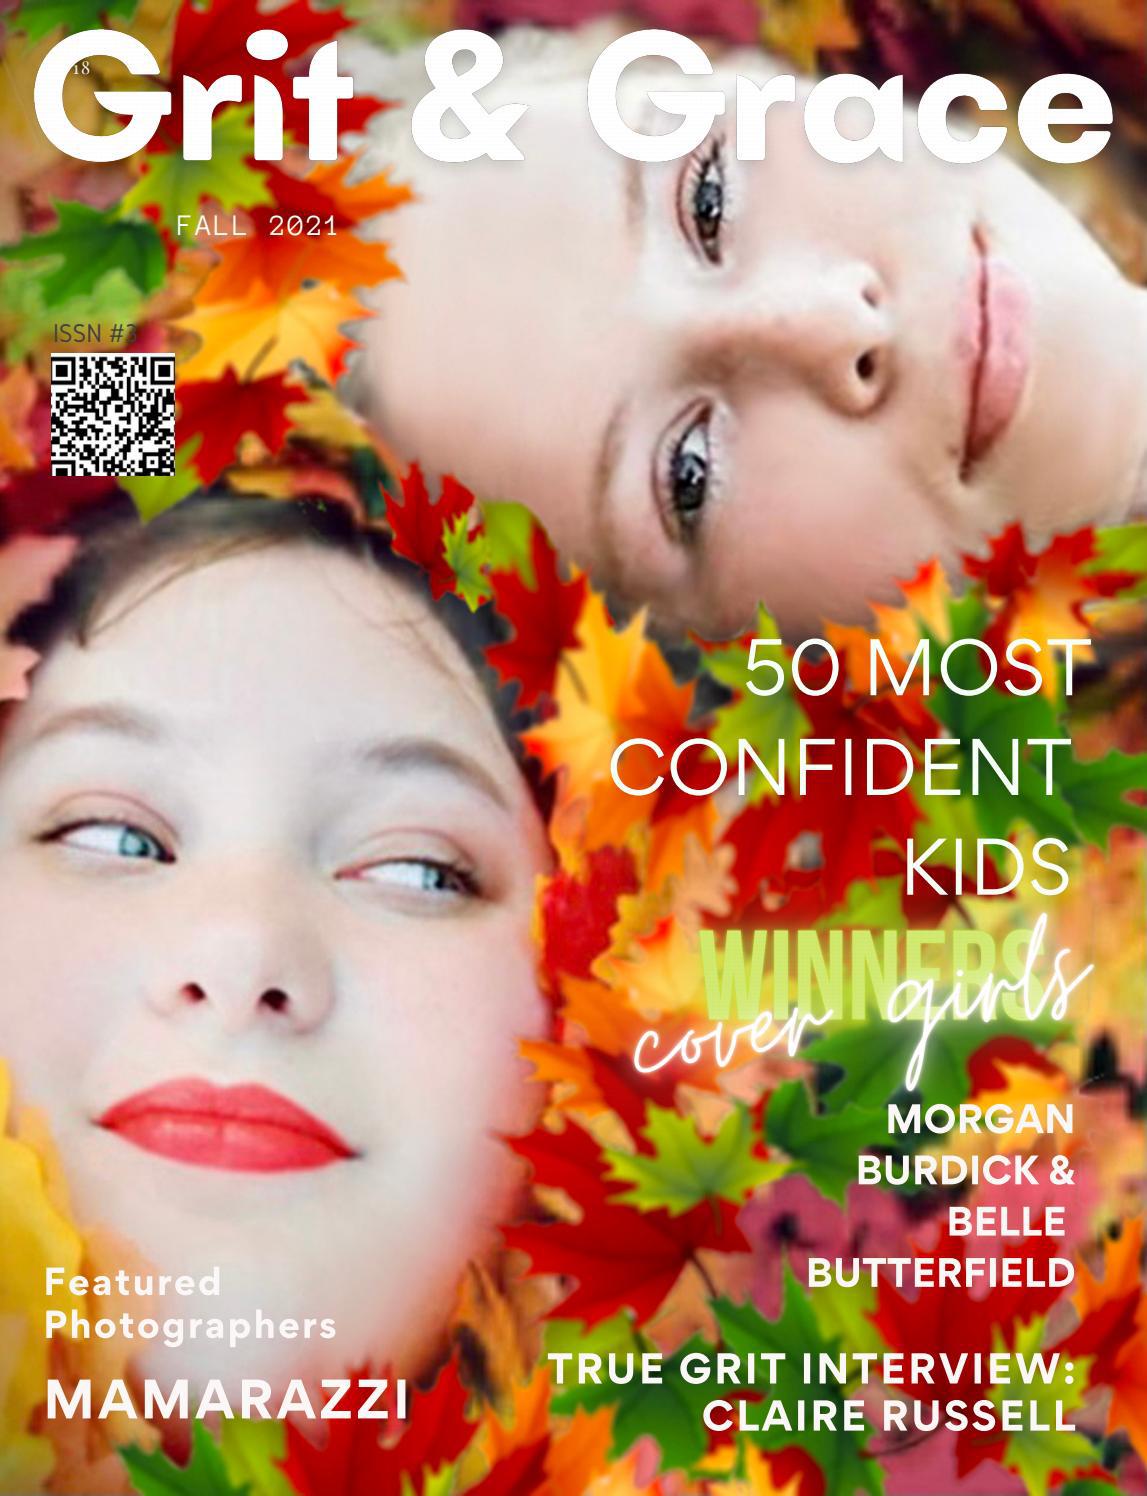 Grit and Grace Magazine - Fall 2021 Issue